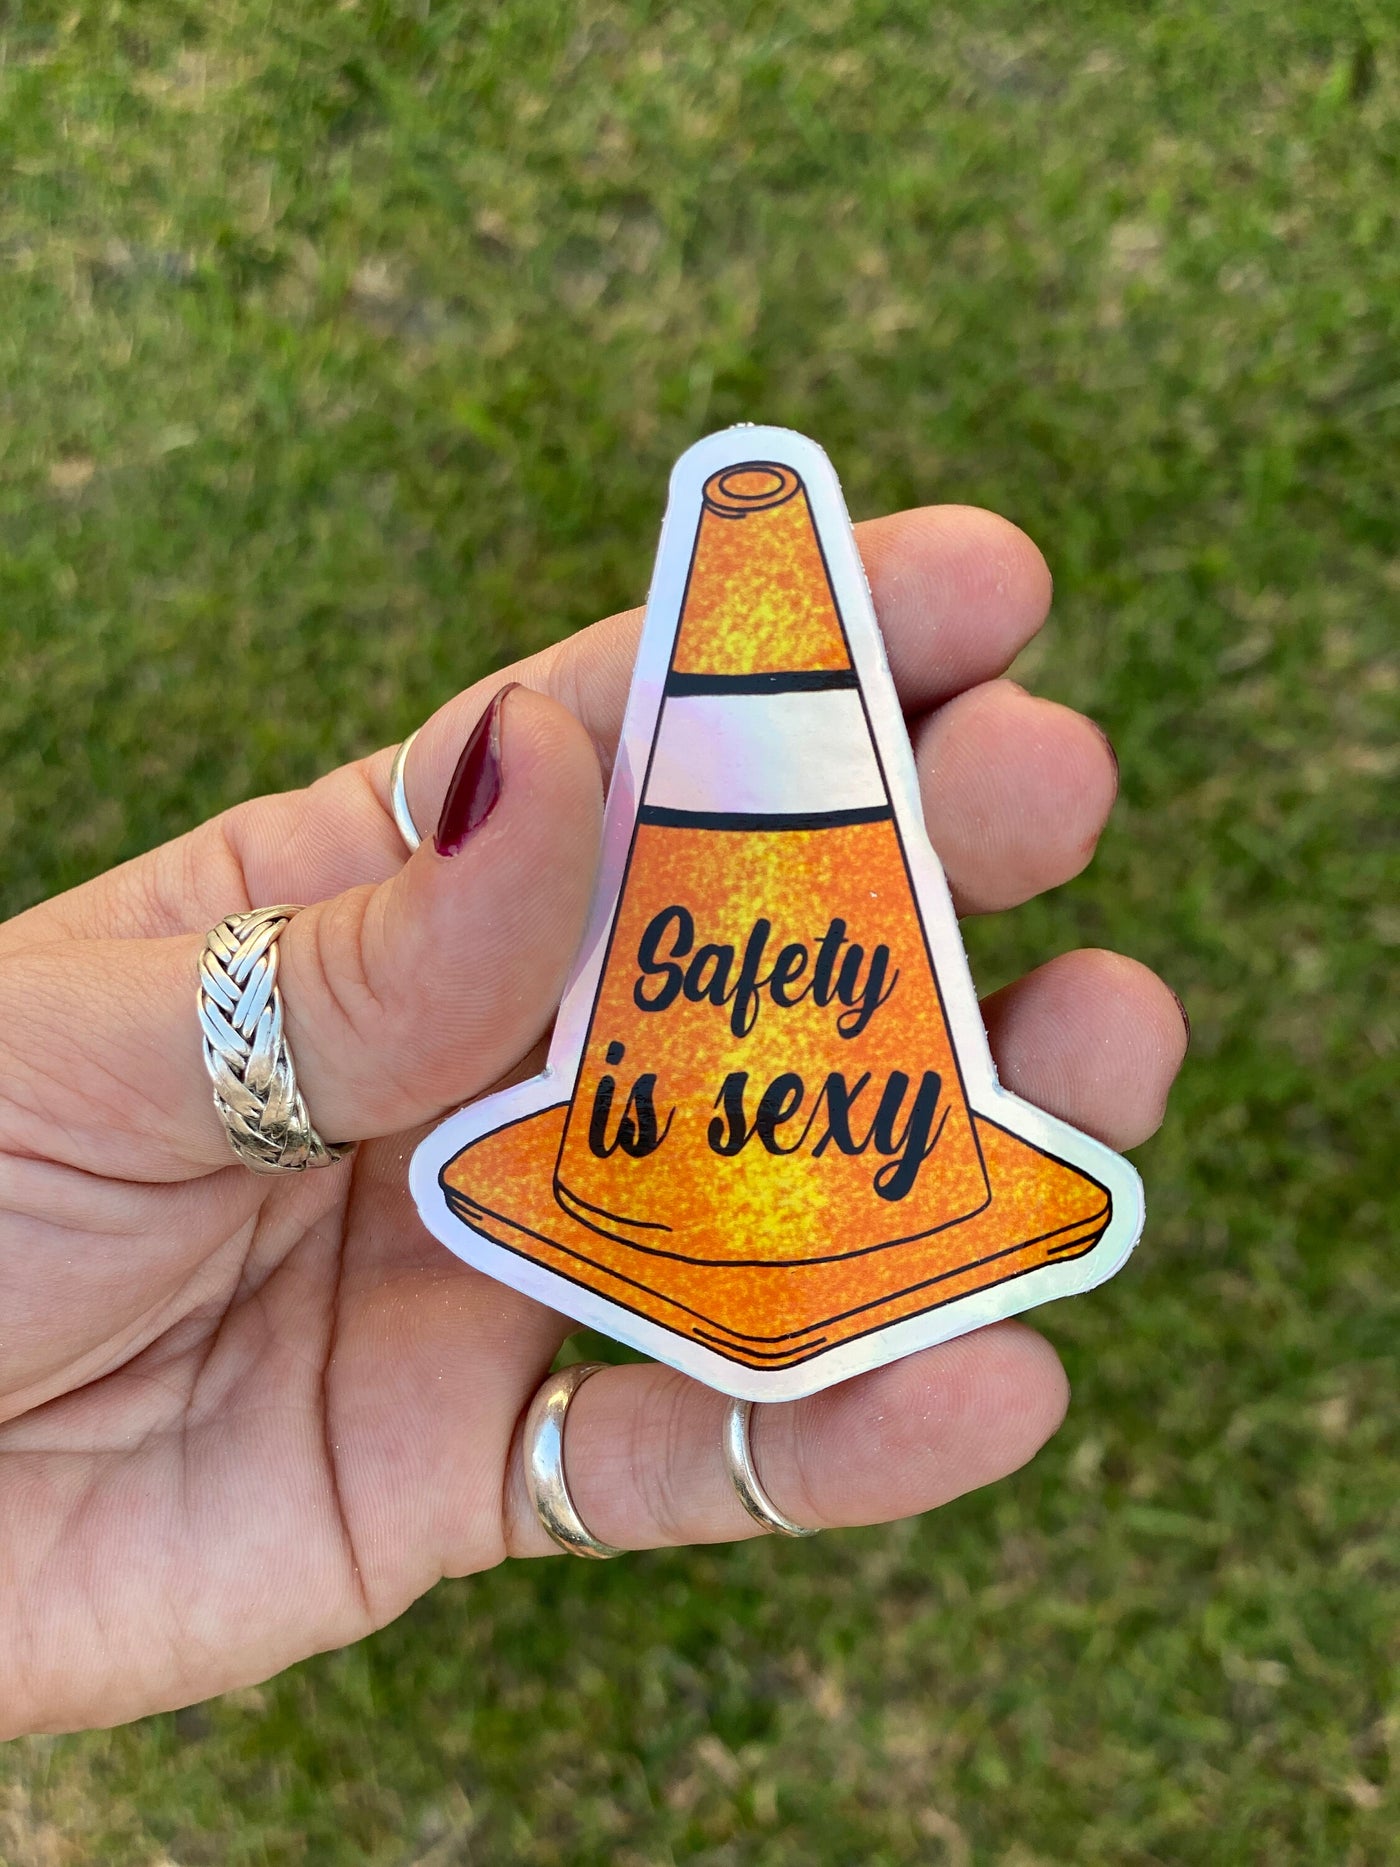 SAFETY IS SEXY Holographic Sticker!